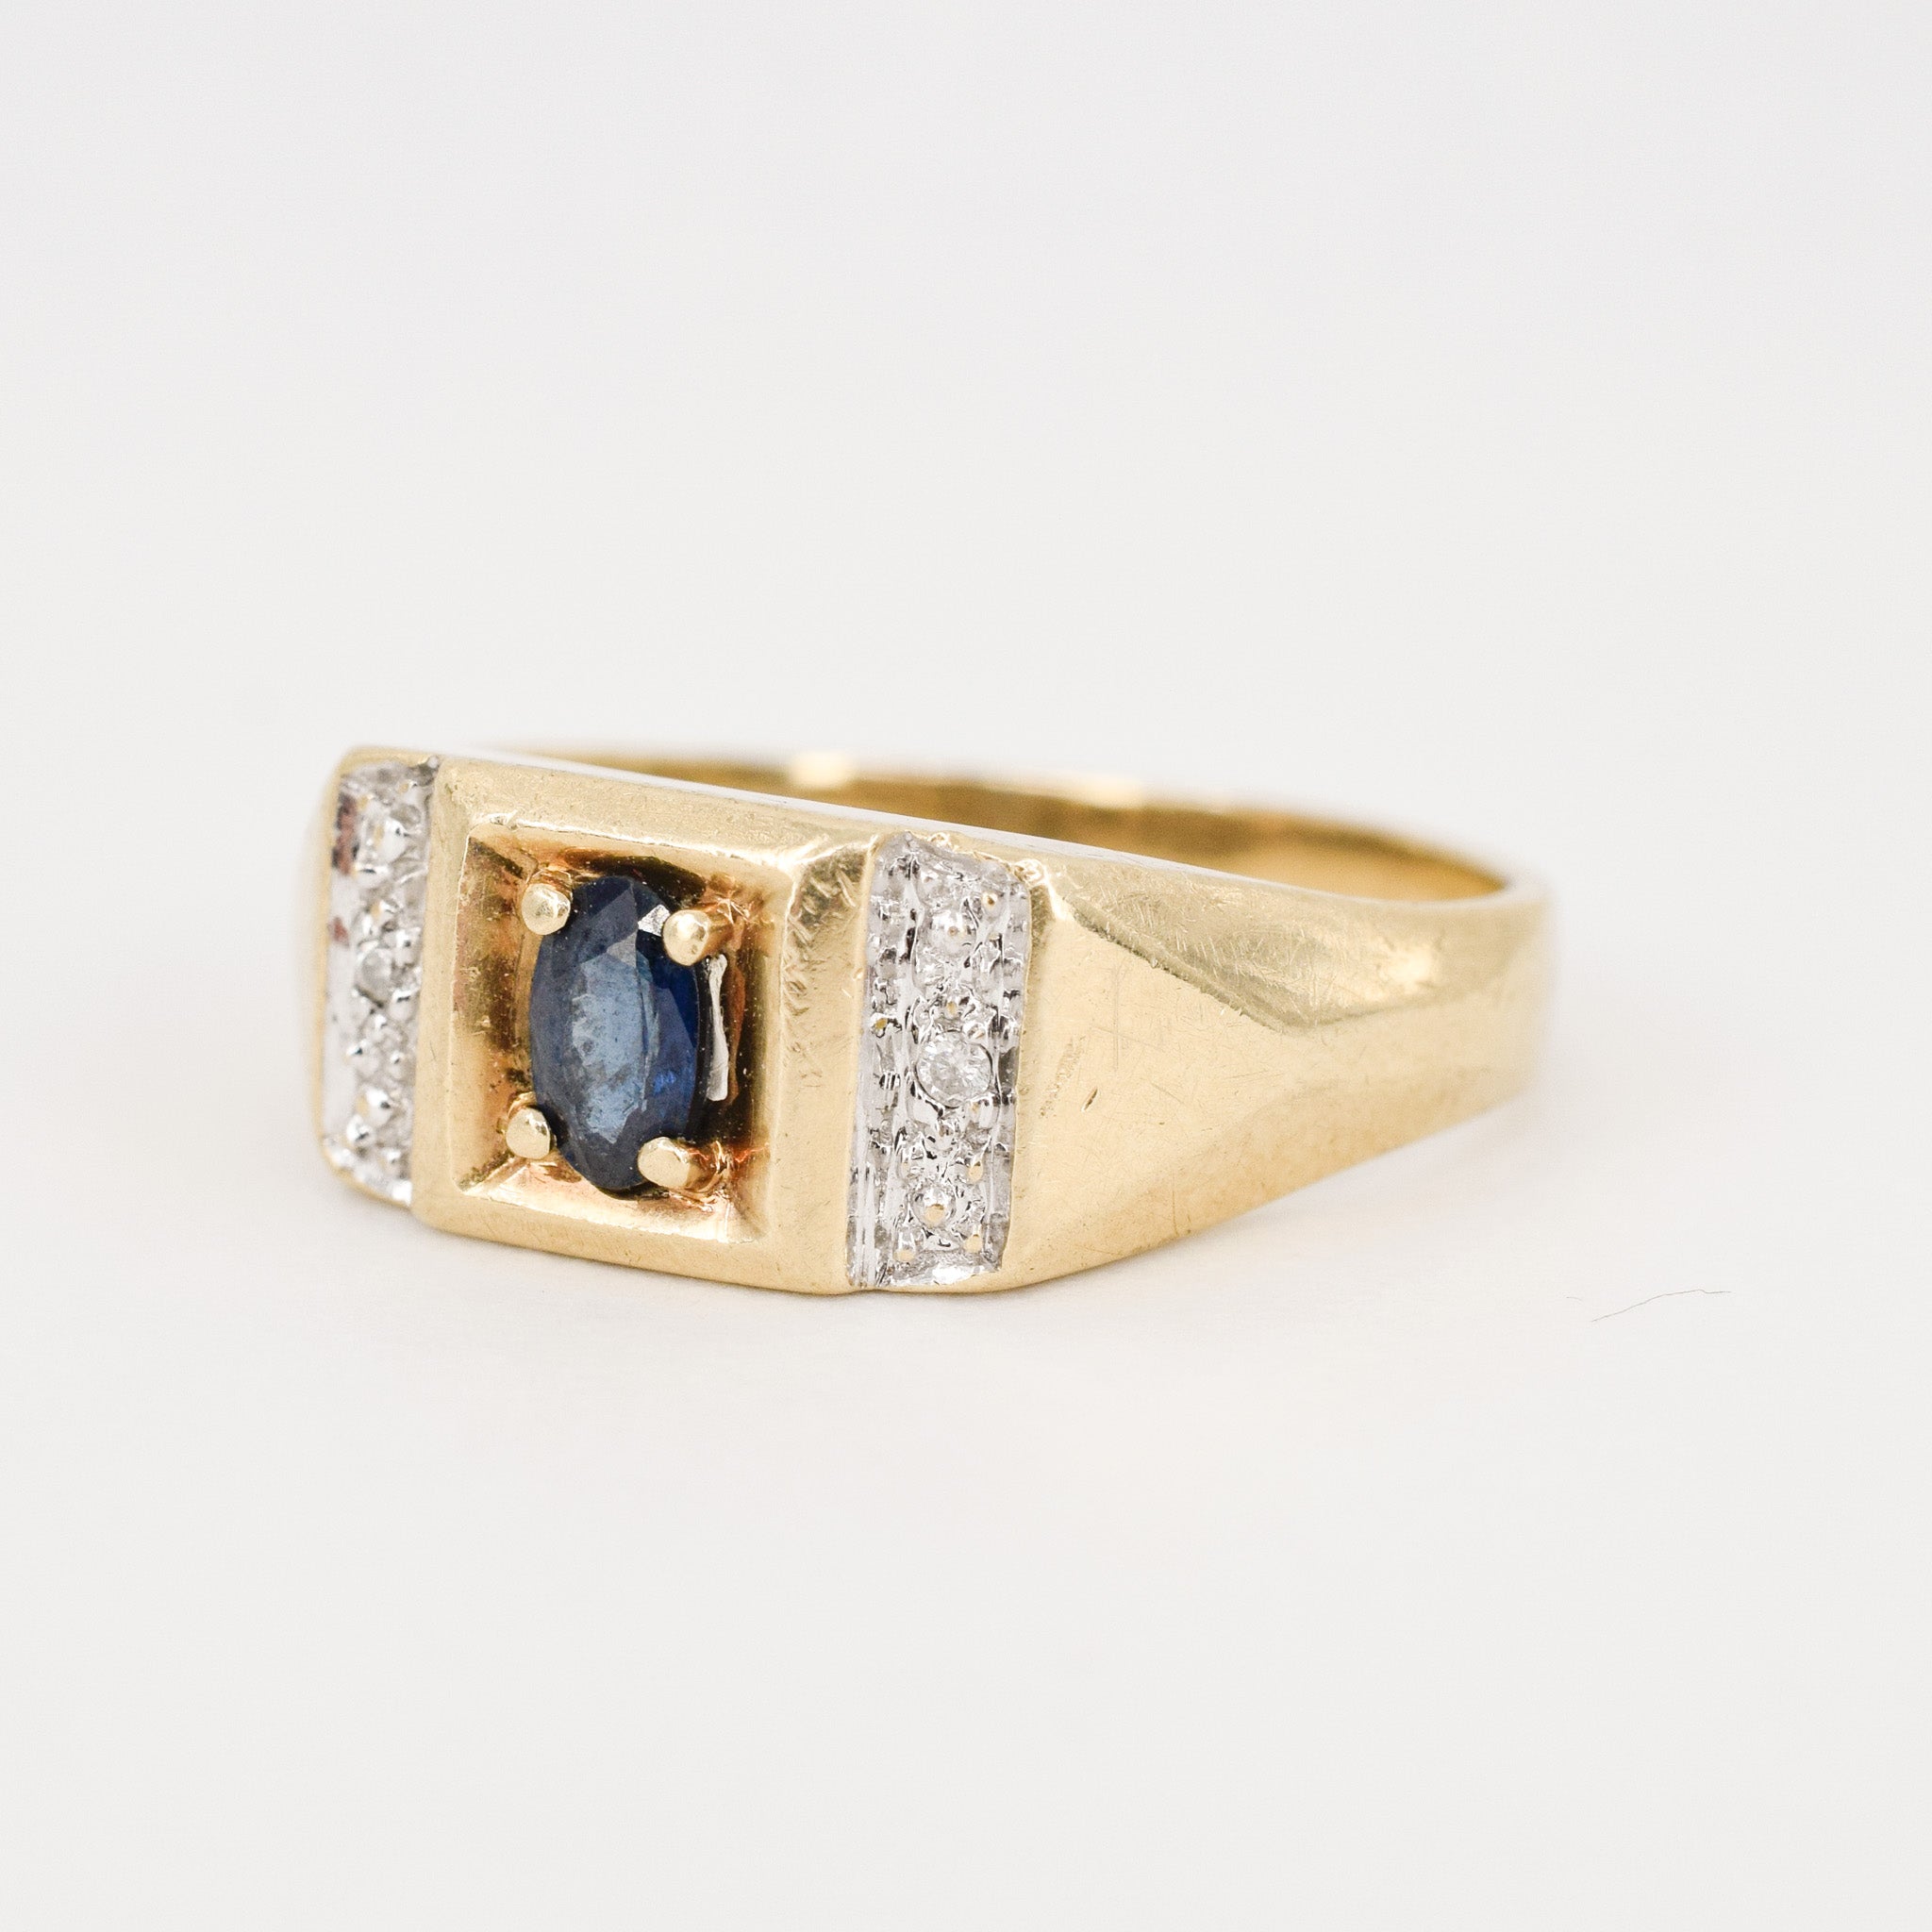 vintage gold sapphire signet ring with diamond accents, folklor vintage jewelry canada